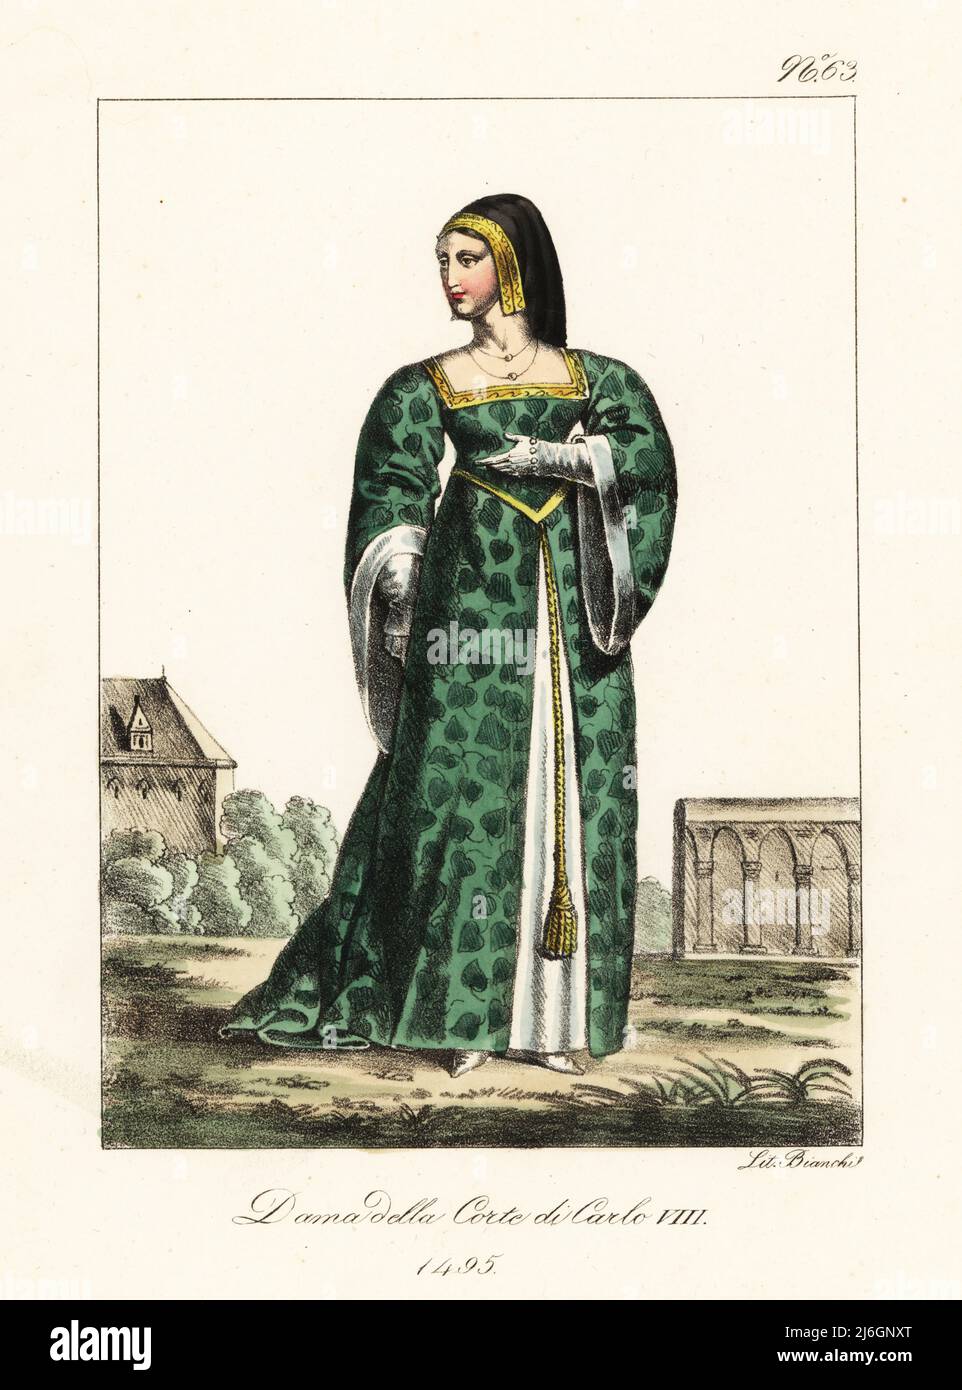 French lady of the court of King Charles VIII of France, 1495. In headdress with black veil, green gown with leaf pattern, white petticoat, slippers, gloves. Dame de la Cour de Charles VIII. Handcoloured lithograph by Lorenzo Bianchi after Hippolyte Lecomte from Costumi civili e militari della monarchia francese dal 1200 al 1820, Naples, 1825. Italian edition of Lecomte’s Civilian and military costumes of the French monarchy from 1200 to 1820. Stock Photo